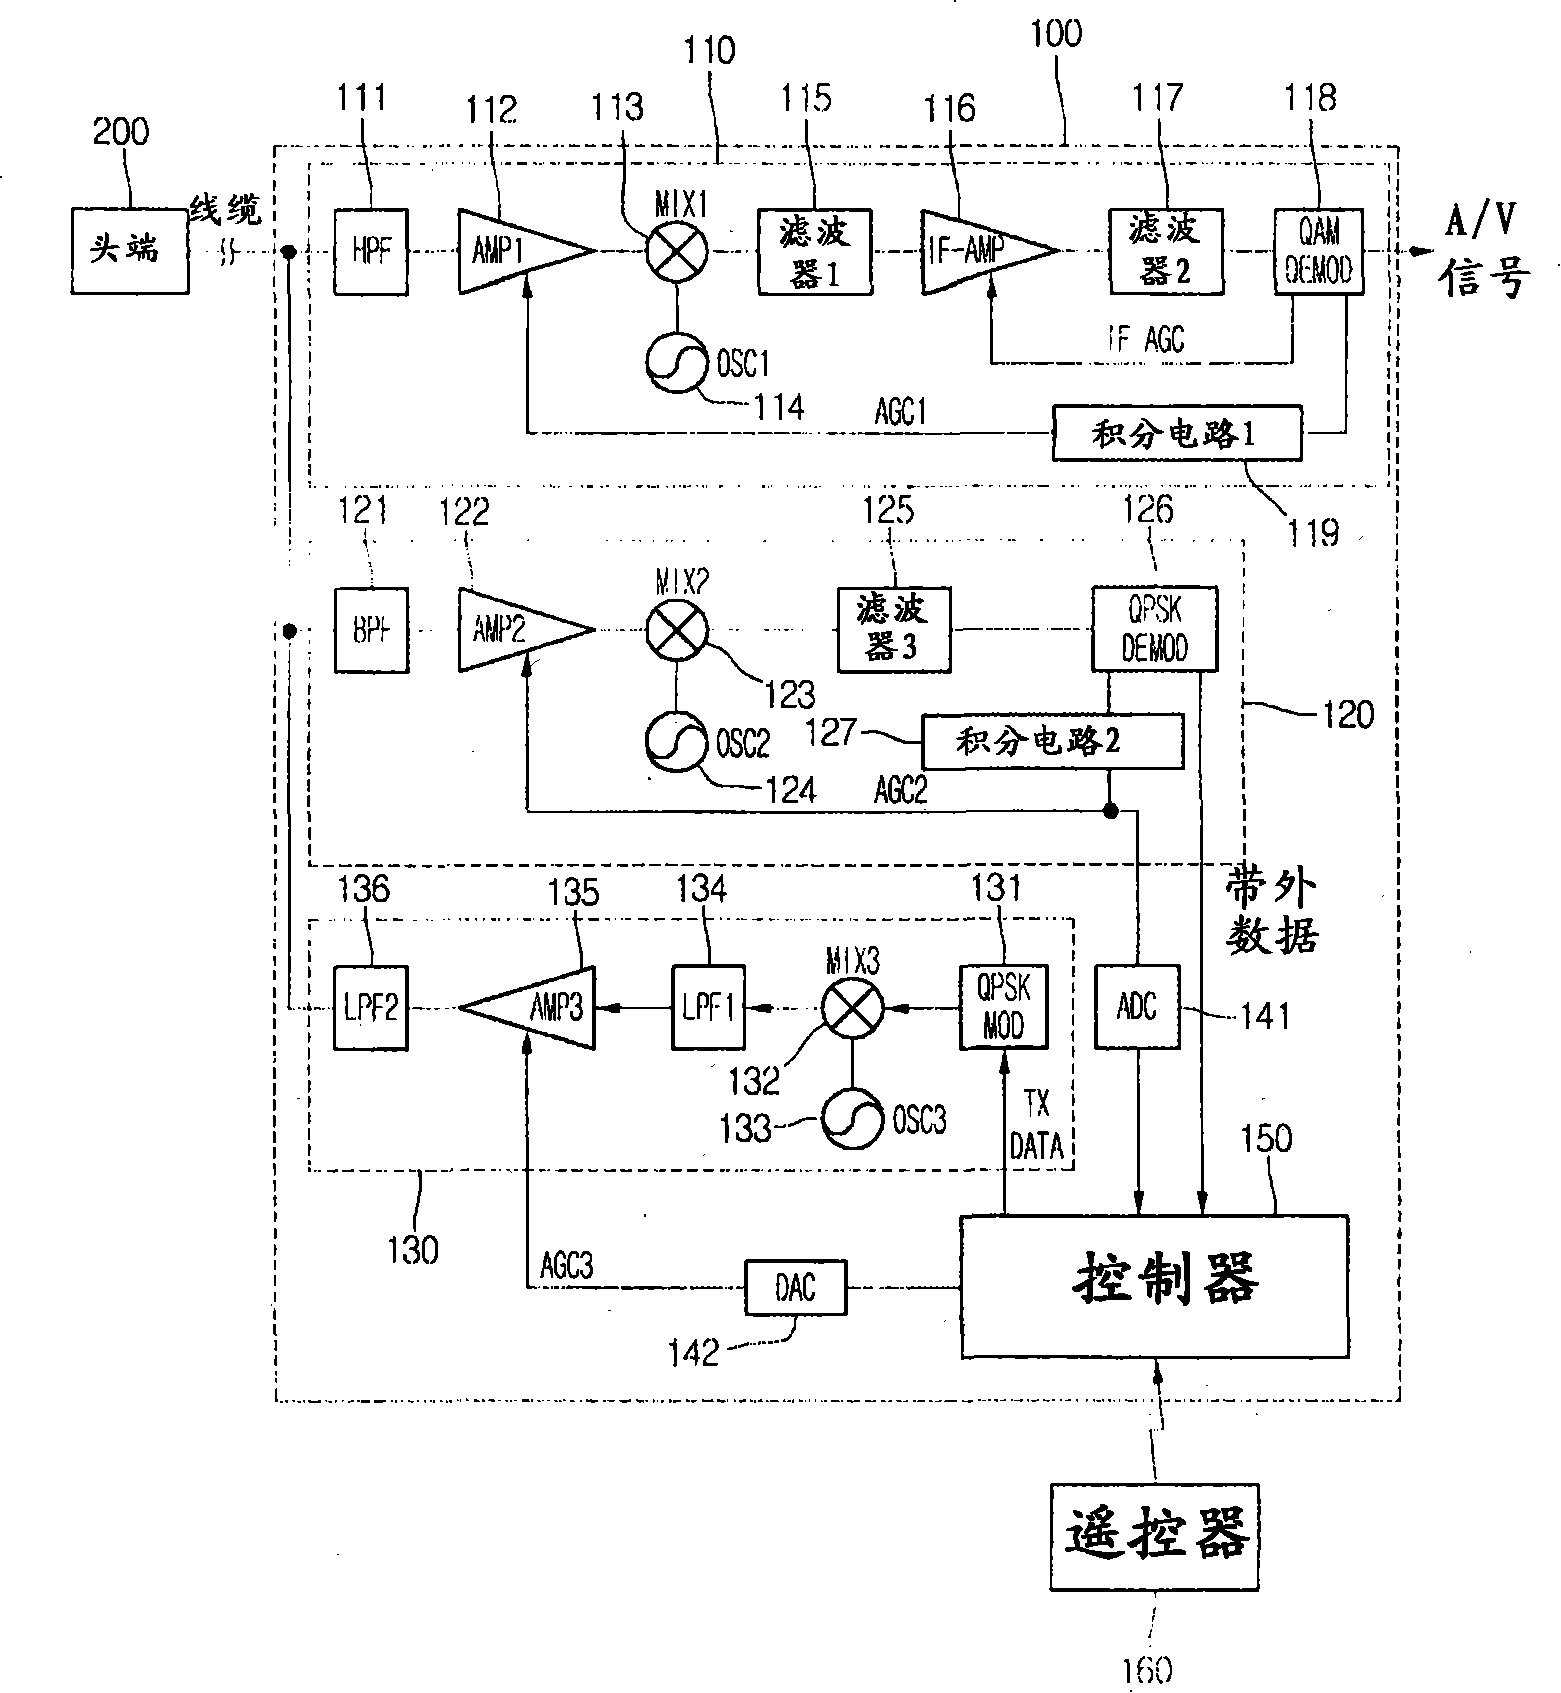 Digital broadcasting receiving apparatus and method of receiving thereof